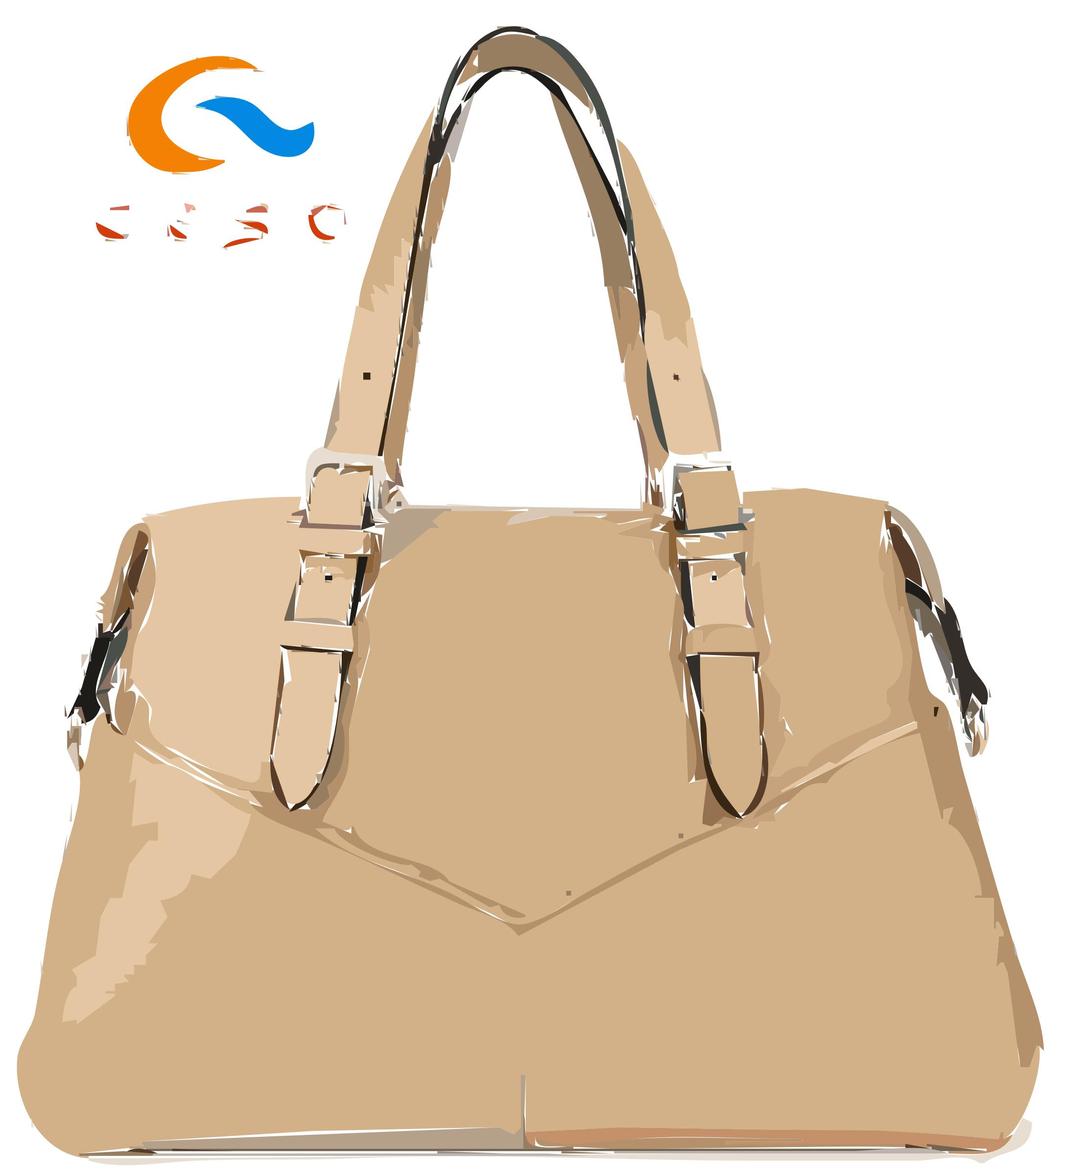 Tan Leather Triangle Purse with logo png transparent